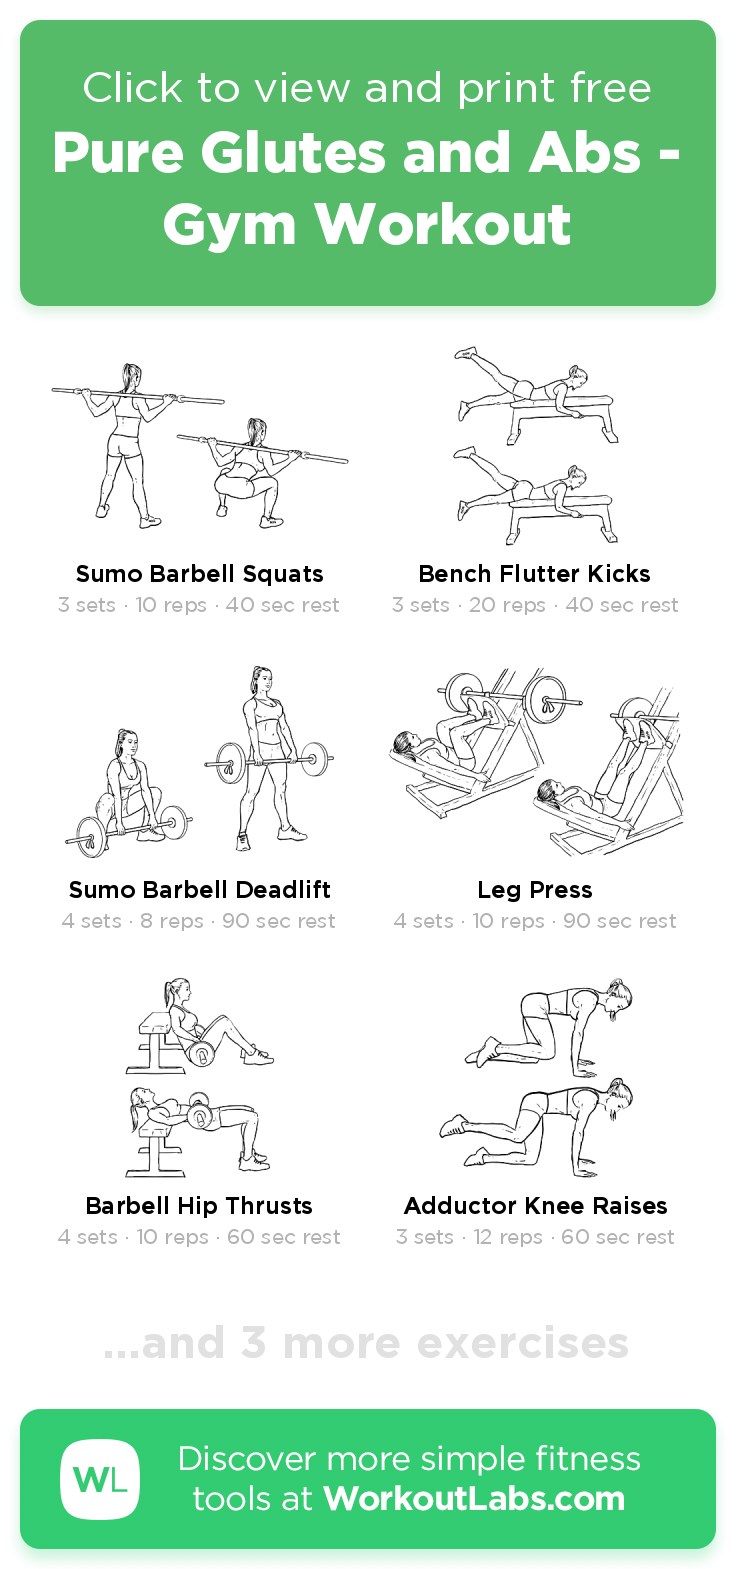 Pure Glutes and Abs - Gym Workout · WorkoutLabs Fit -   14 fitness Gym glutes ideas